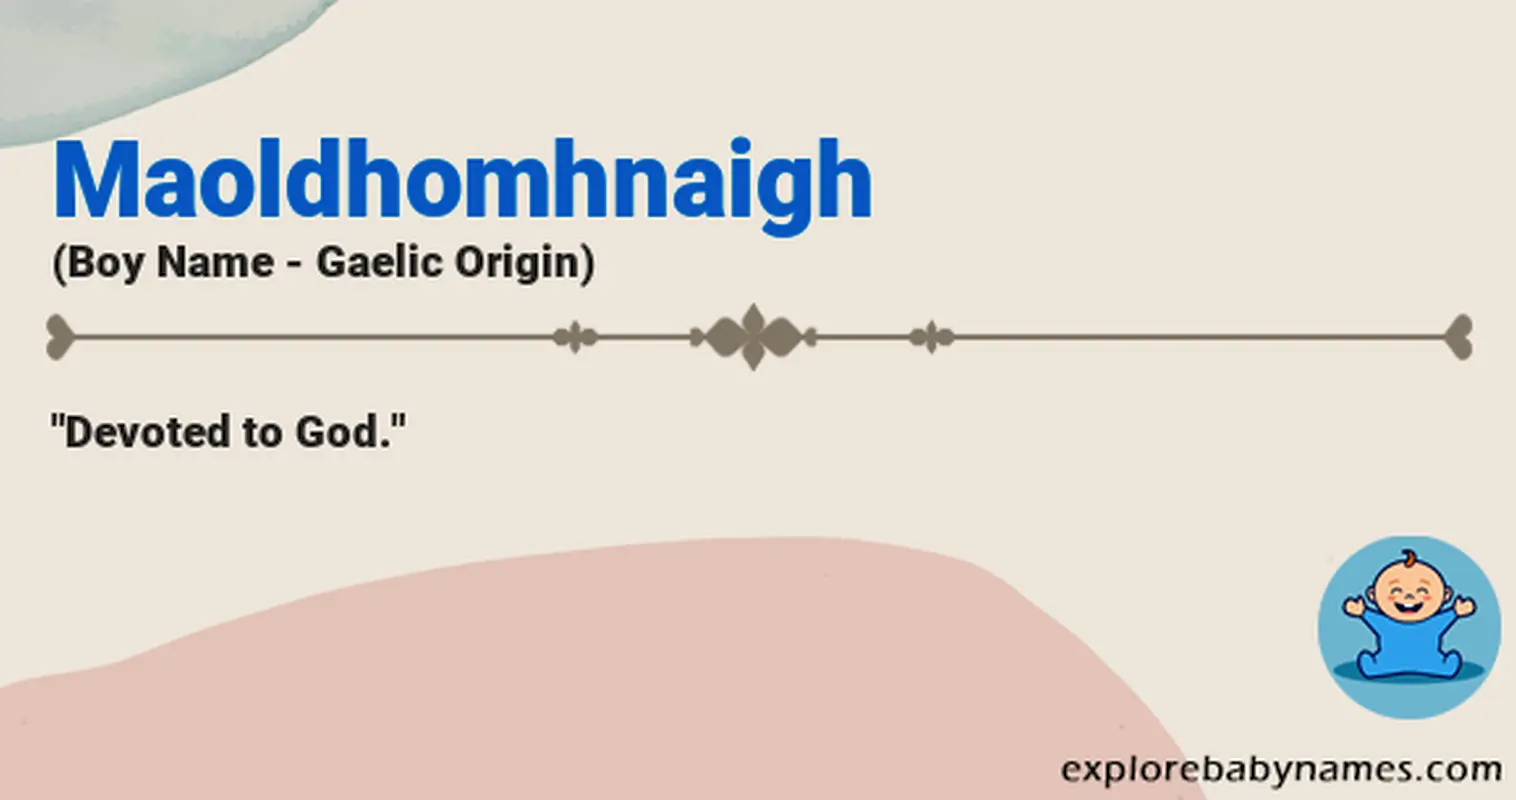 Meaning of Maoldhomhnaigh